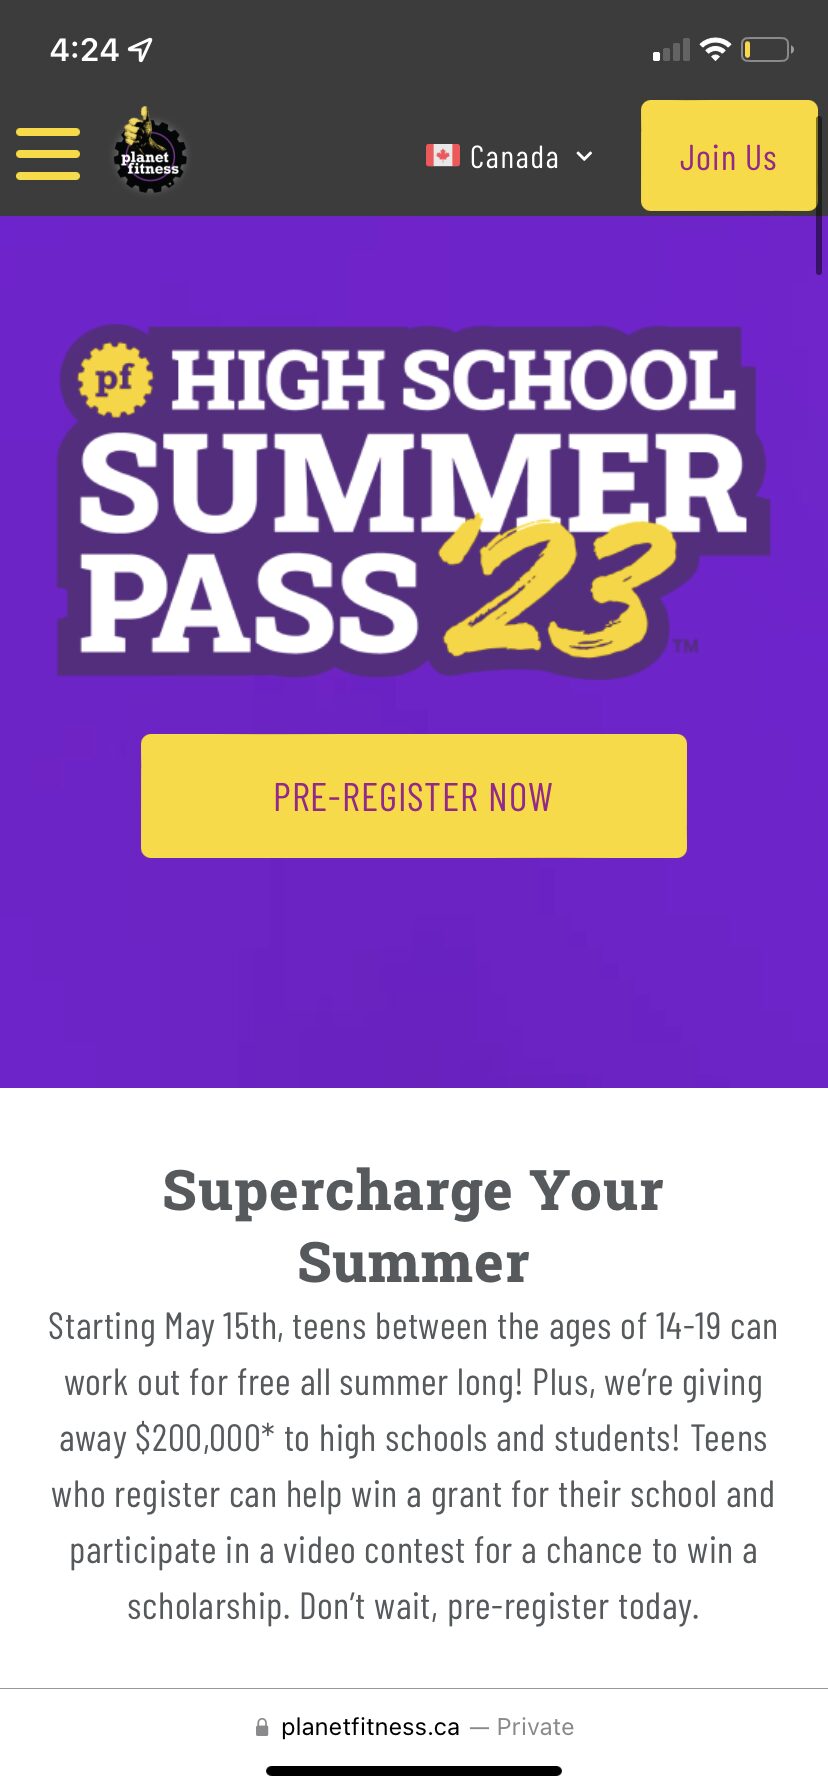 Planet Fitness helps support summer fitness